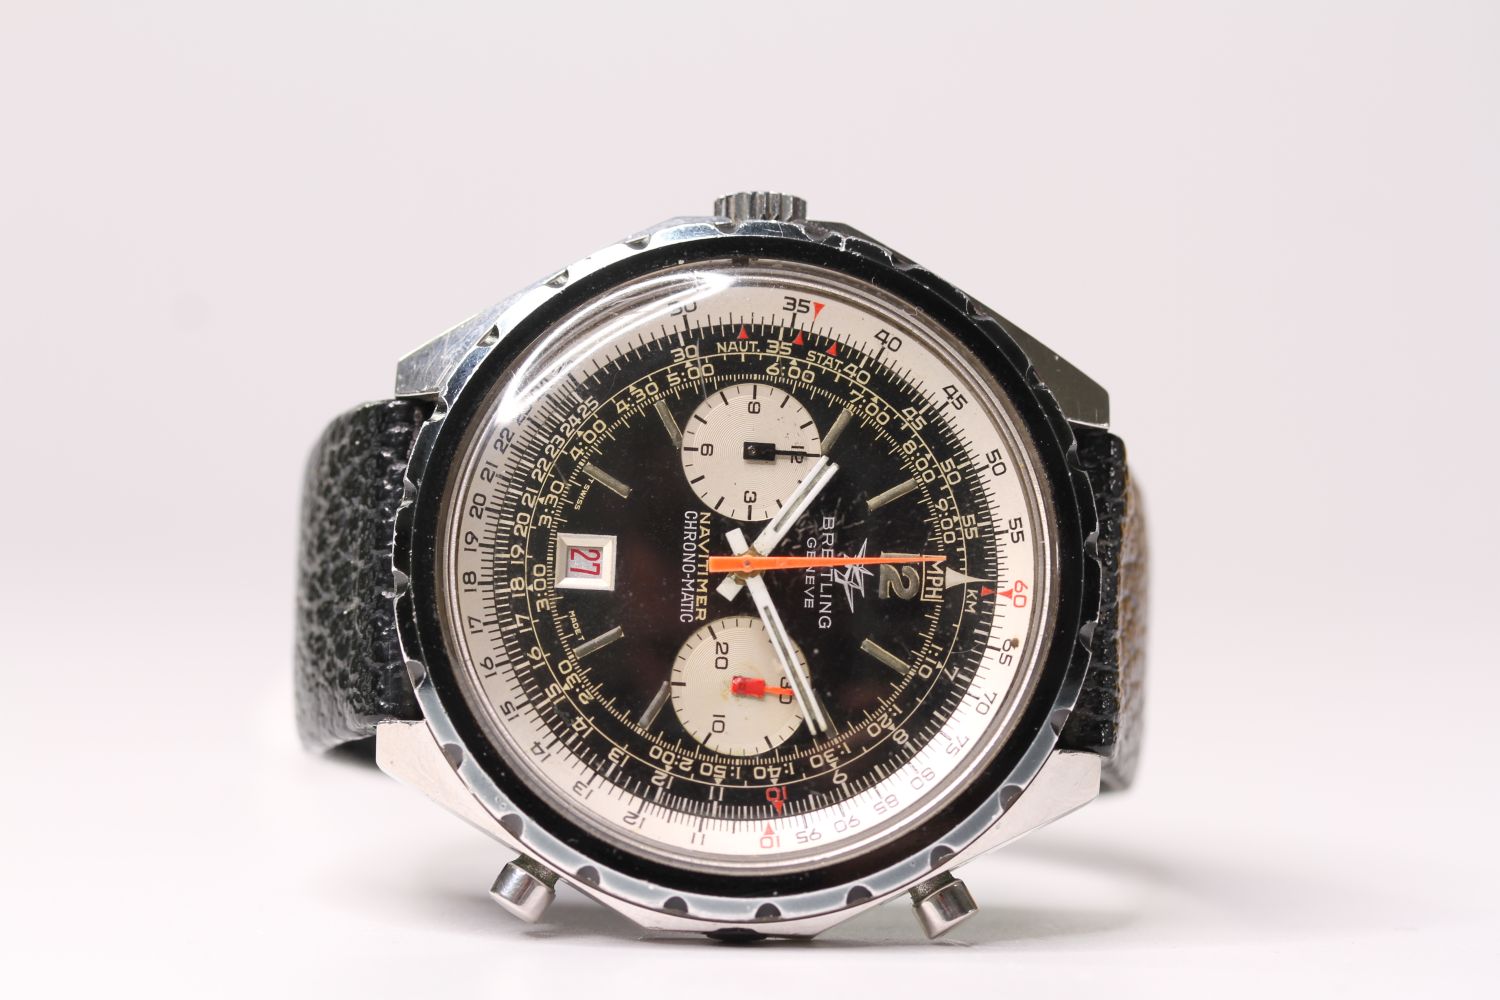 GENTS BREITLING NAVITIMER DDE BR 1152-67, circular black and white dial with illuminated hands,